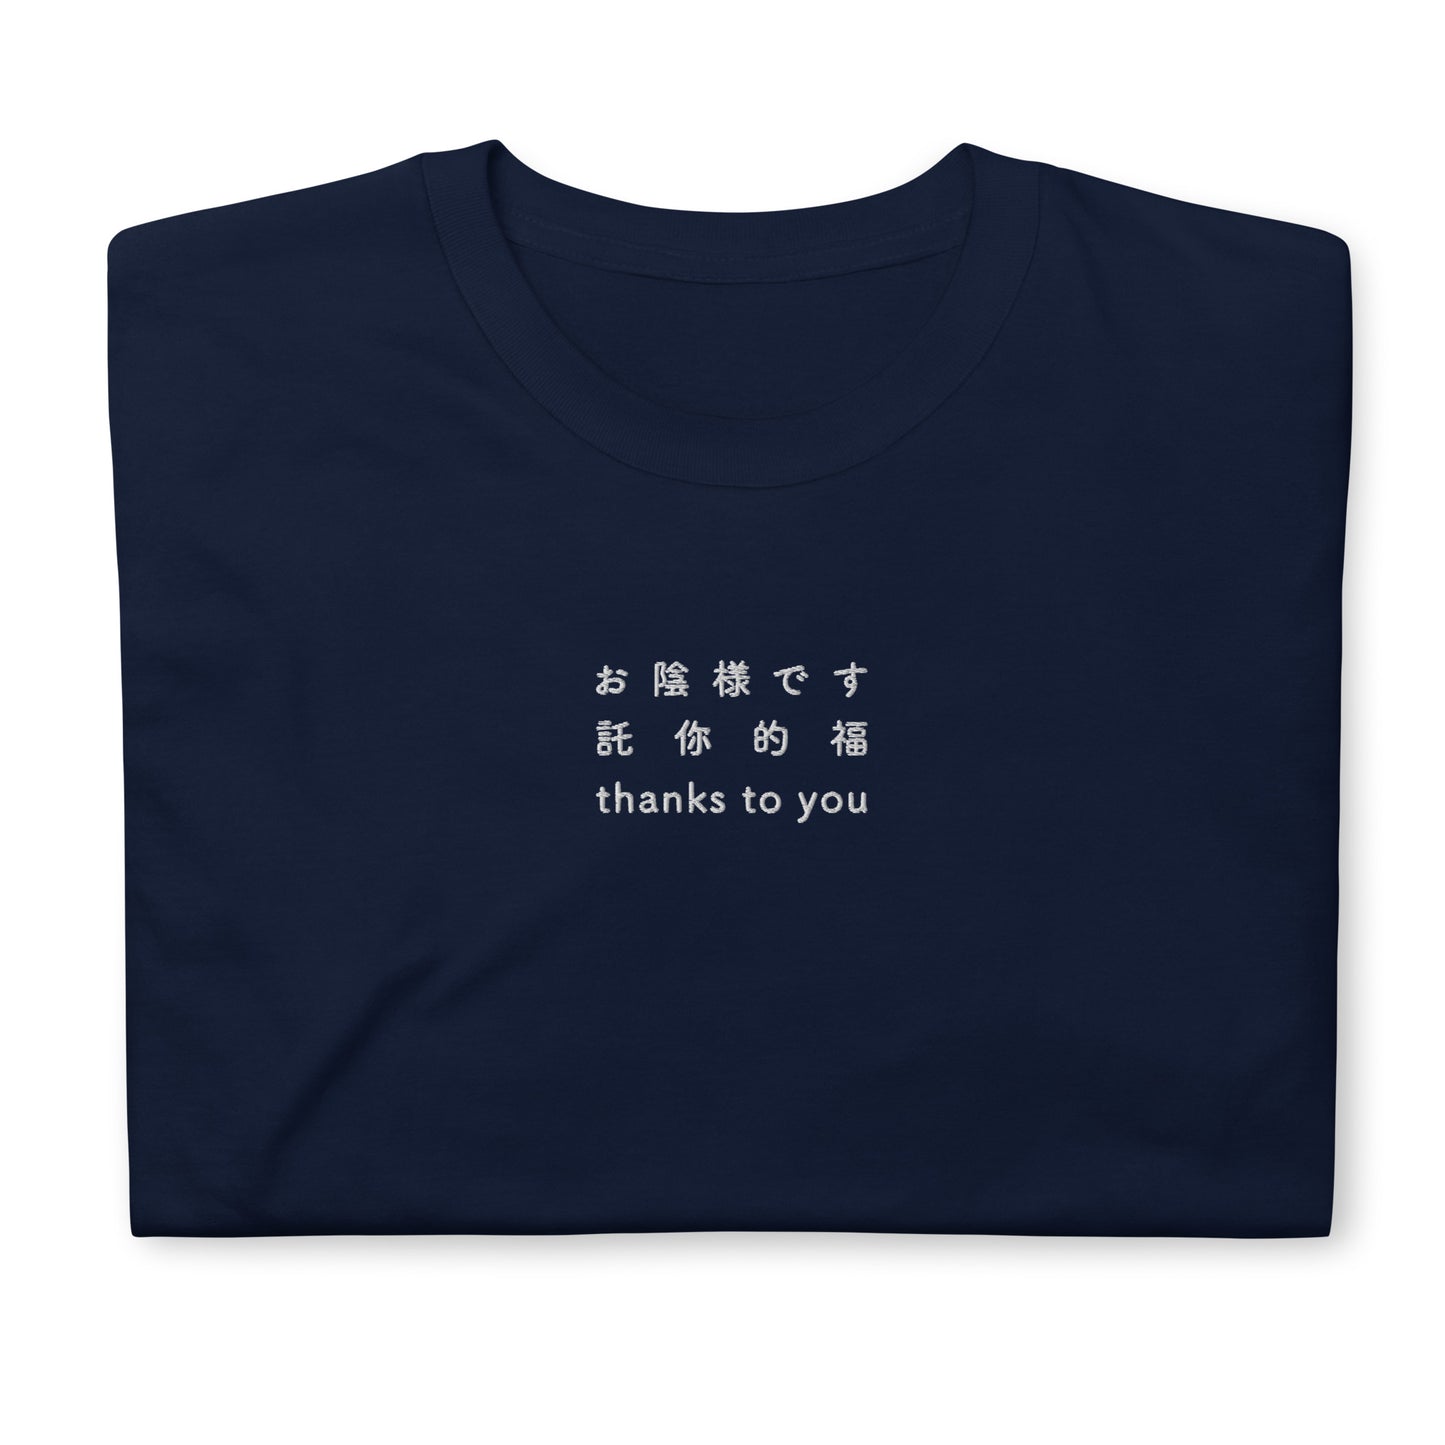 Navy High Quality Tee - Front Design with an white Embroidery "thanks to you" in Japanese,Chinese and English